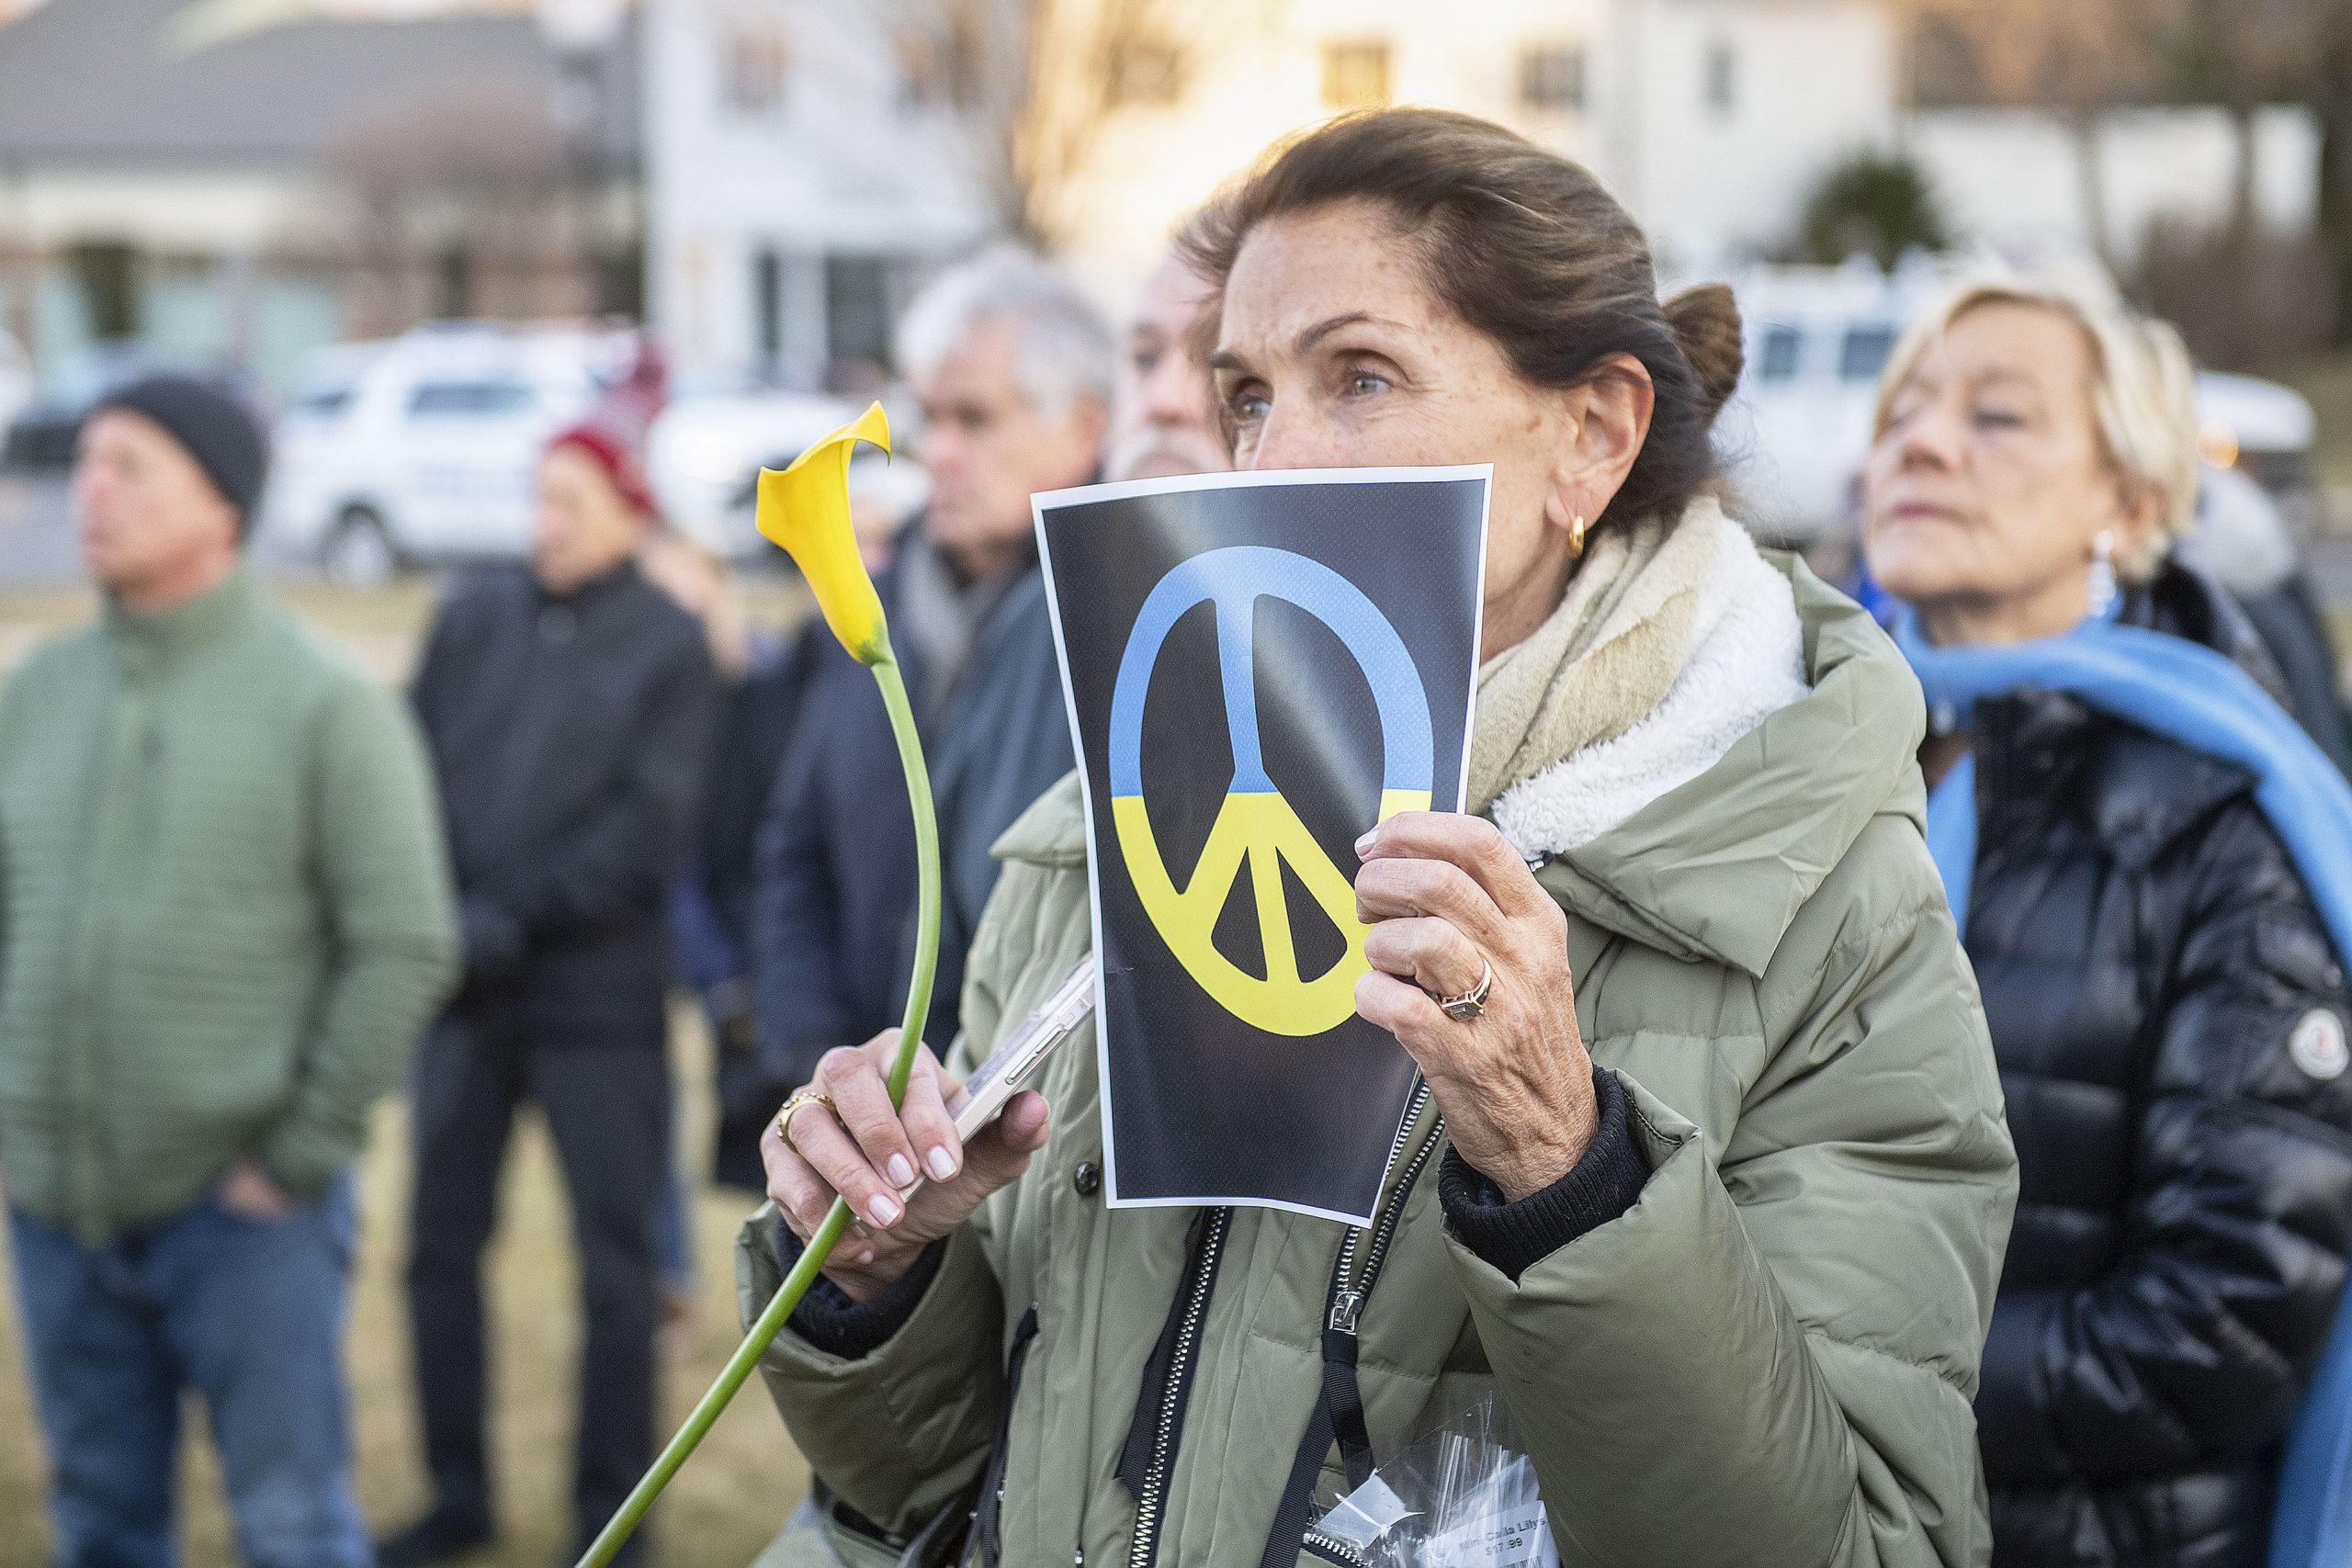 A rally in support of Ukraine during the current Russian invasion was held last Thursday on the Hook Mill Village Green in East Hampton. MICHAEL HELLER